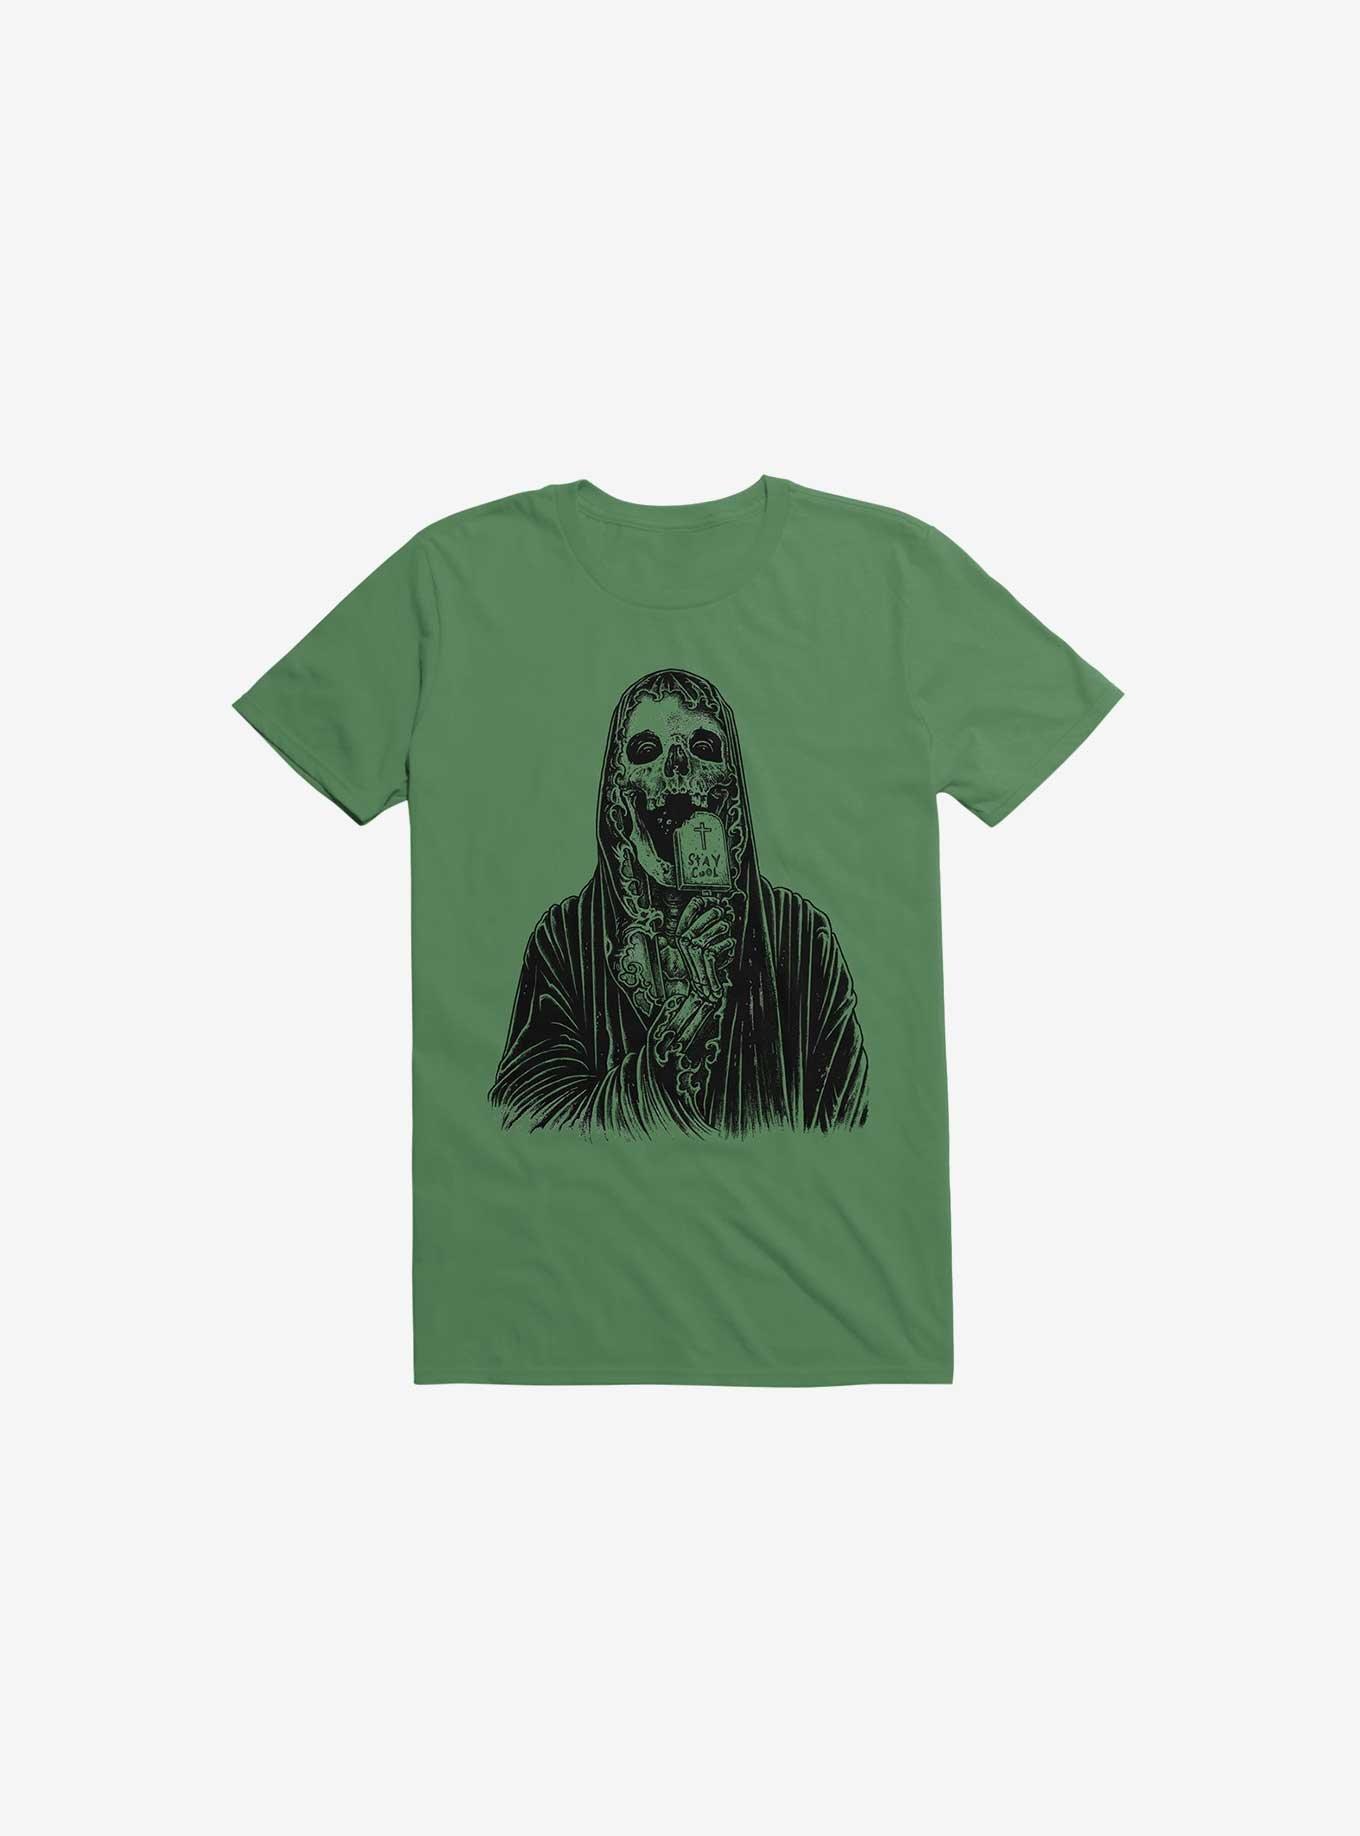 Stay Cool Kelly Green T-Shirt